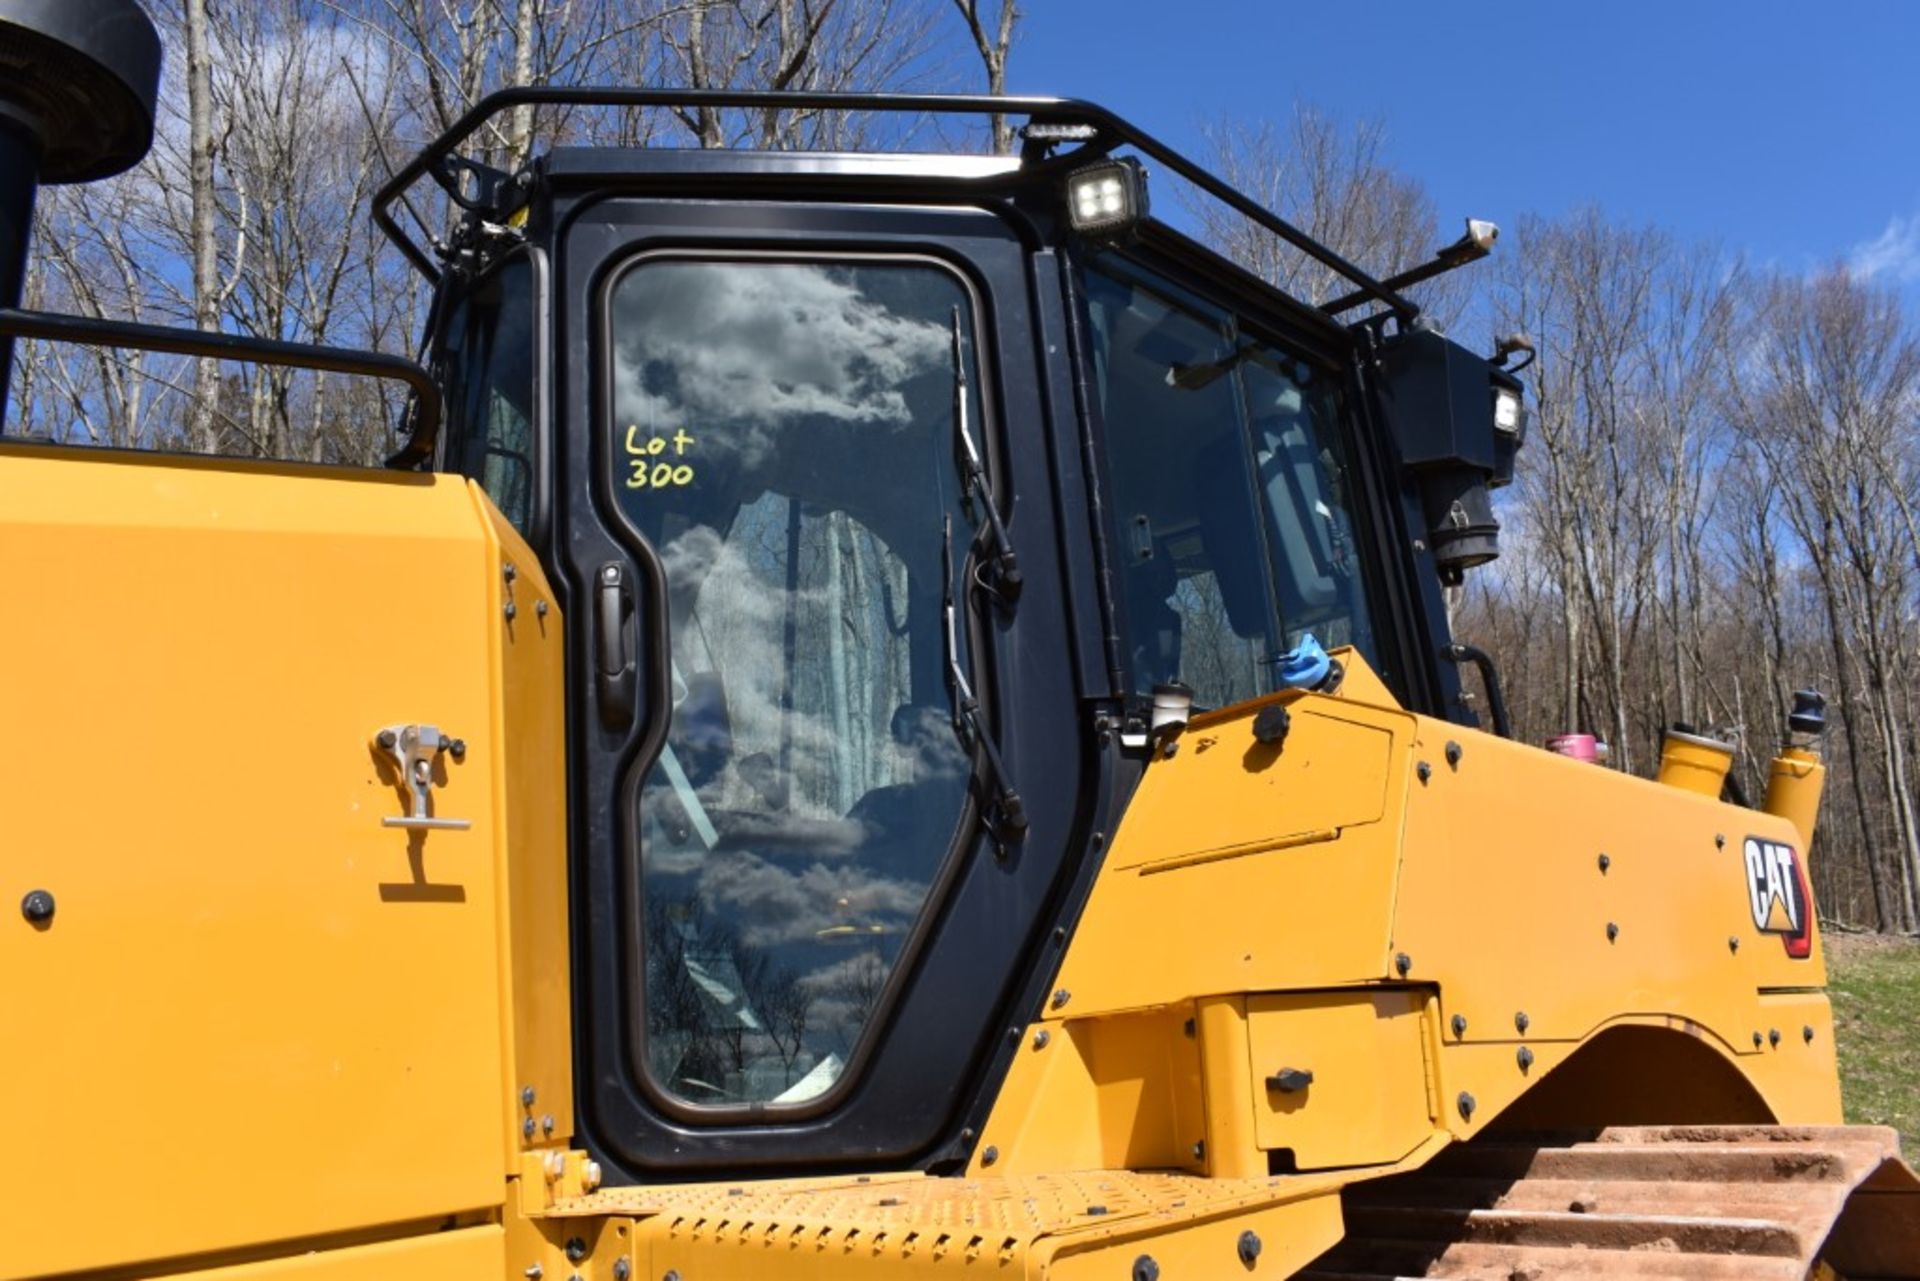 2022 CAT D6 LGP Dozer 1762 Hours, Runs and Operates, 158" 6 Way Blade, New Cutting Edge, Ripper - Image 42 of 56